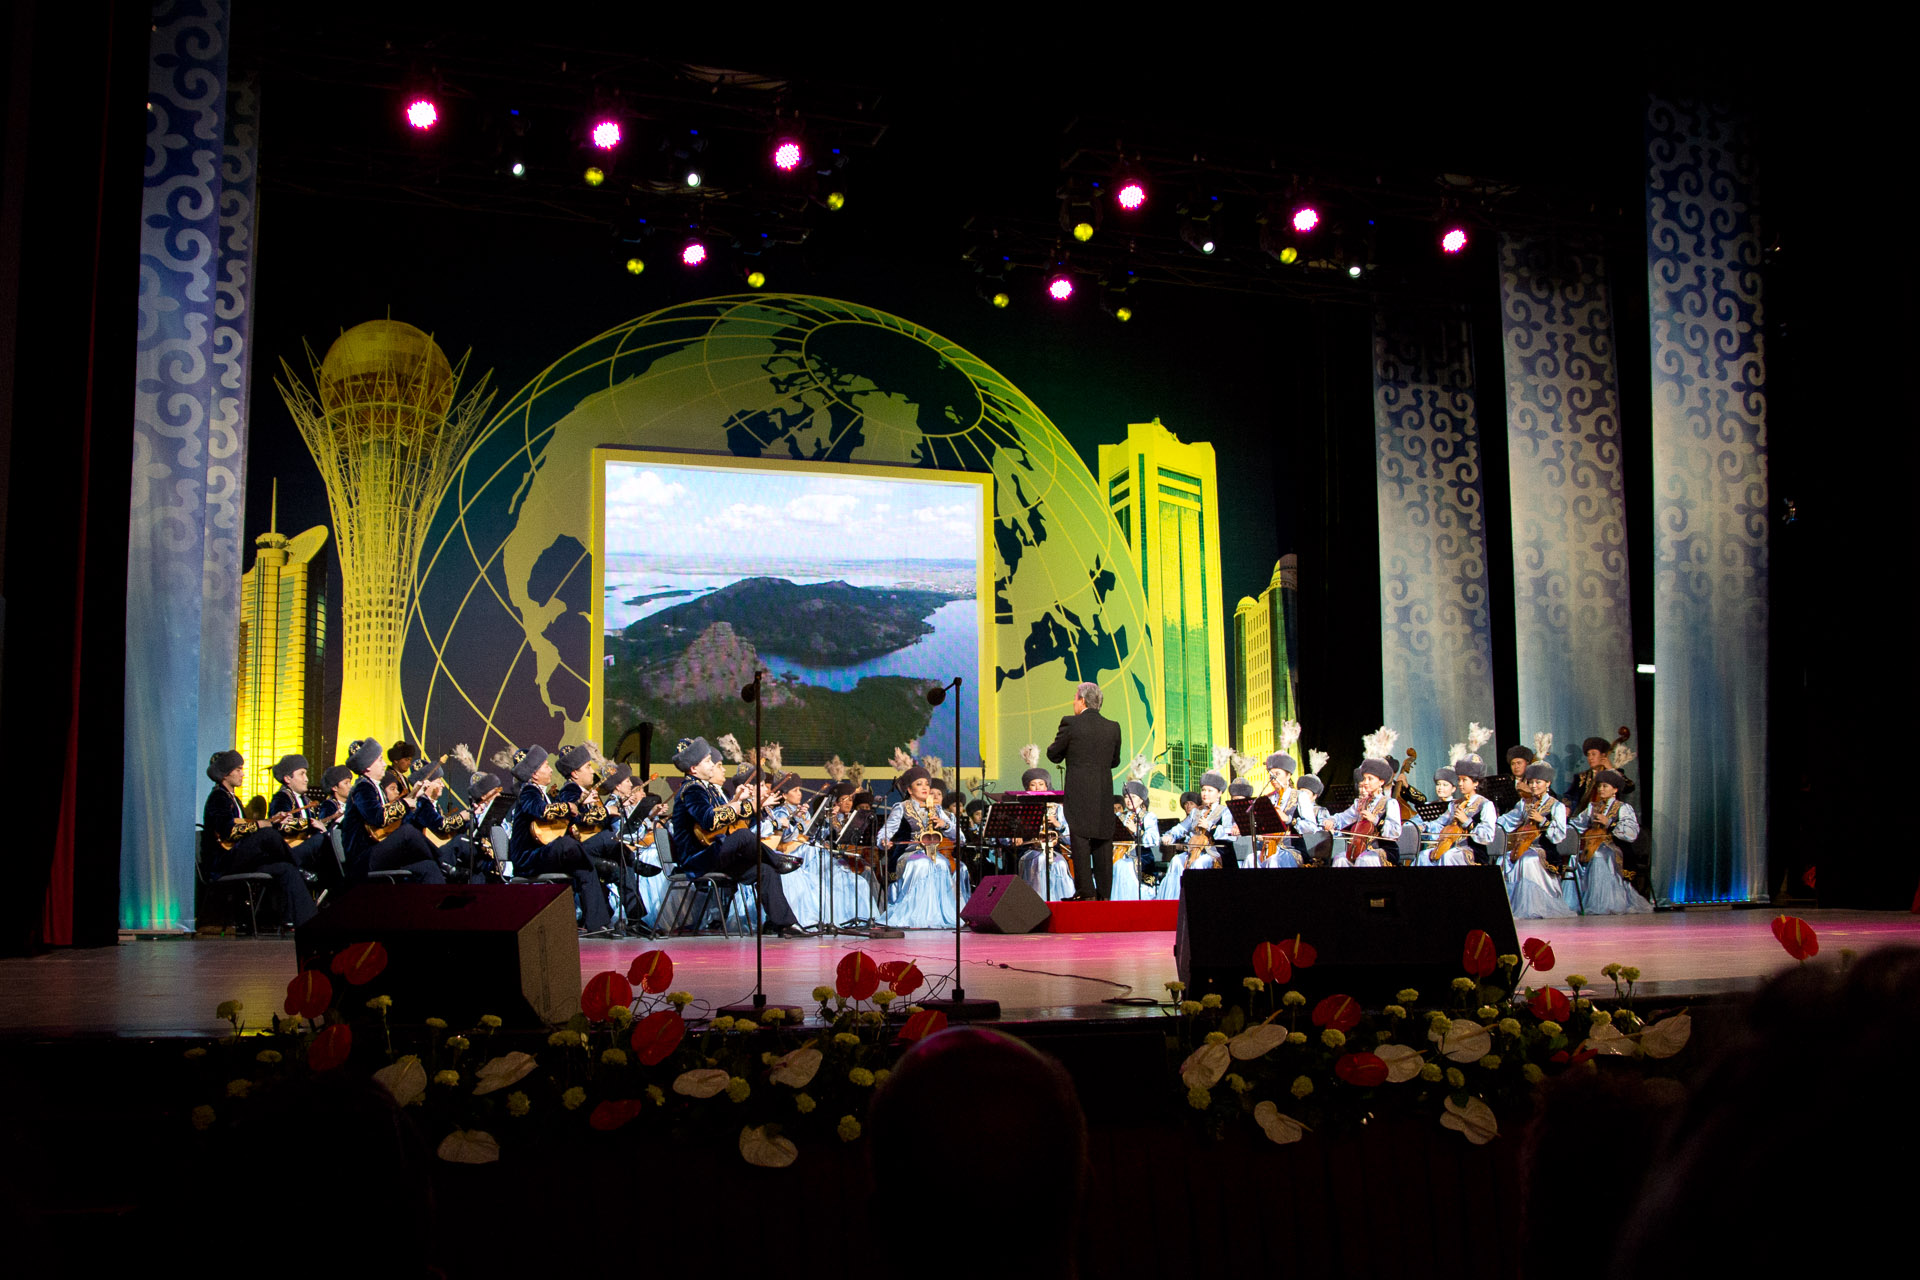 Concert at the Palace of Peace and Reconciliation